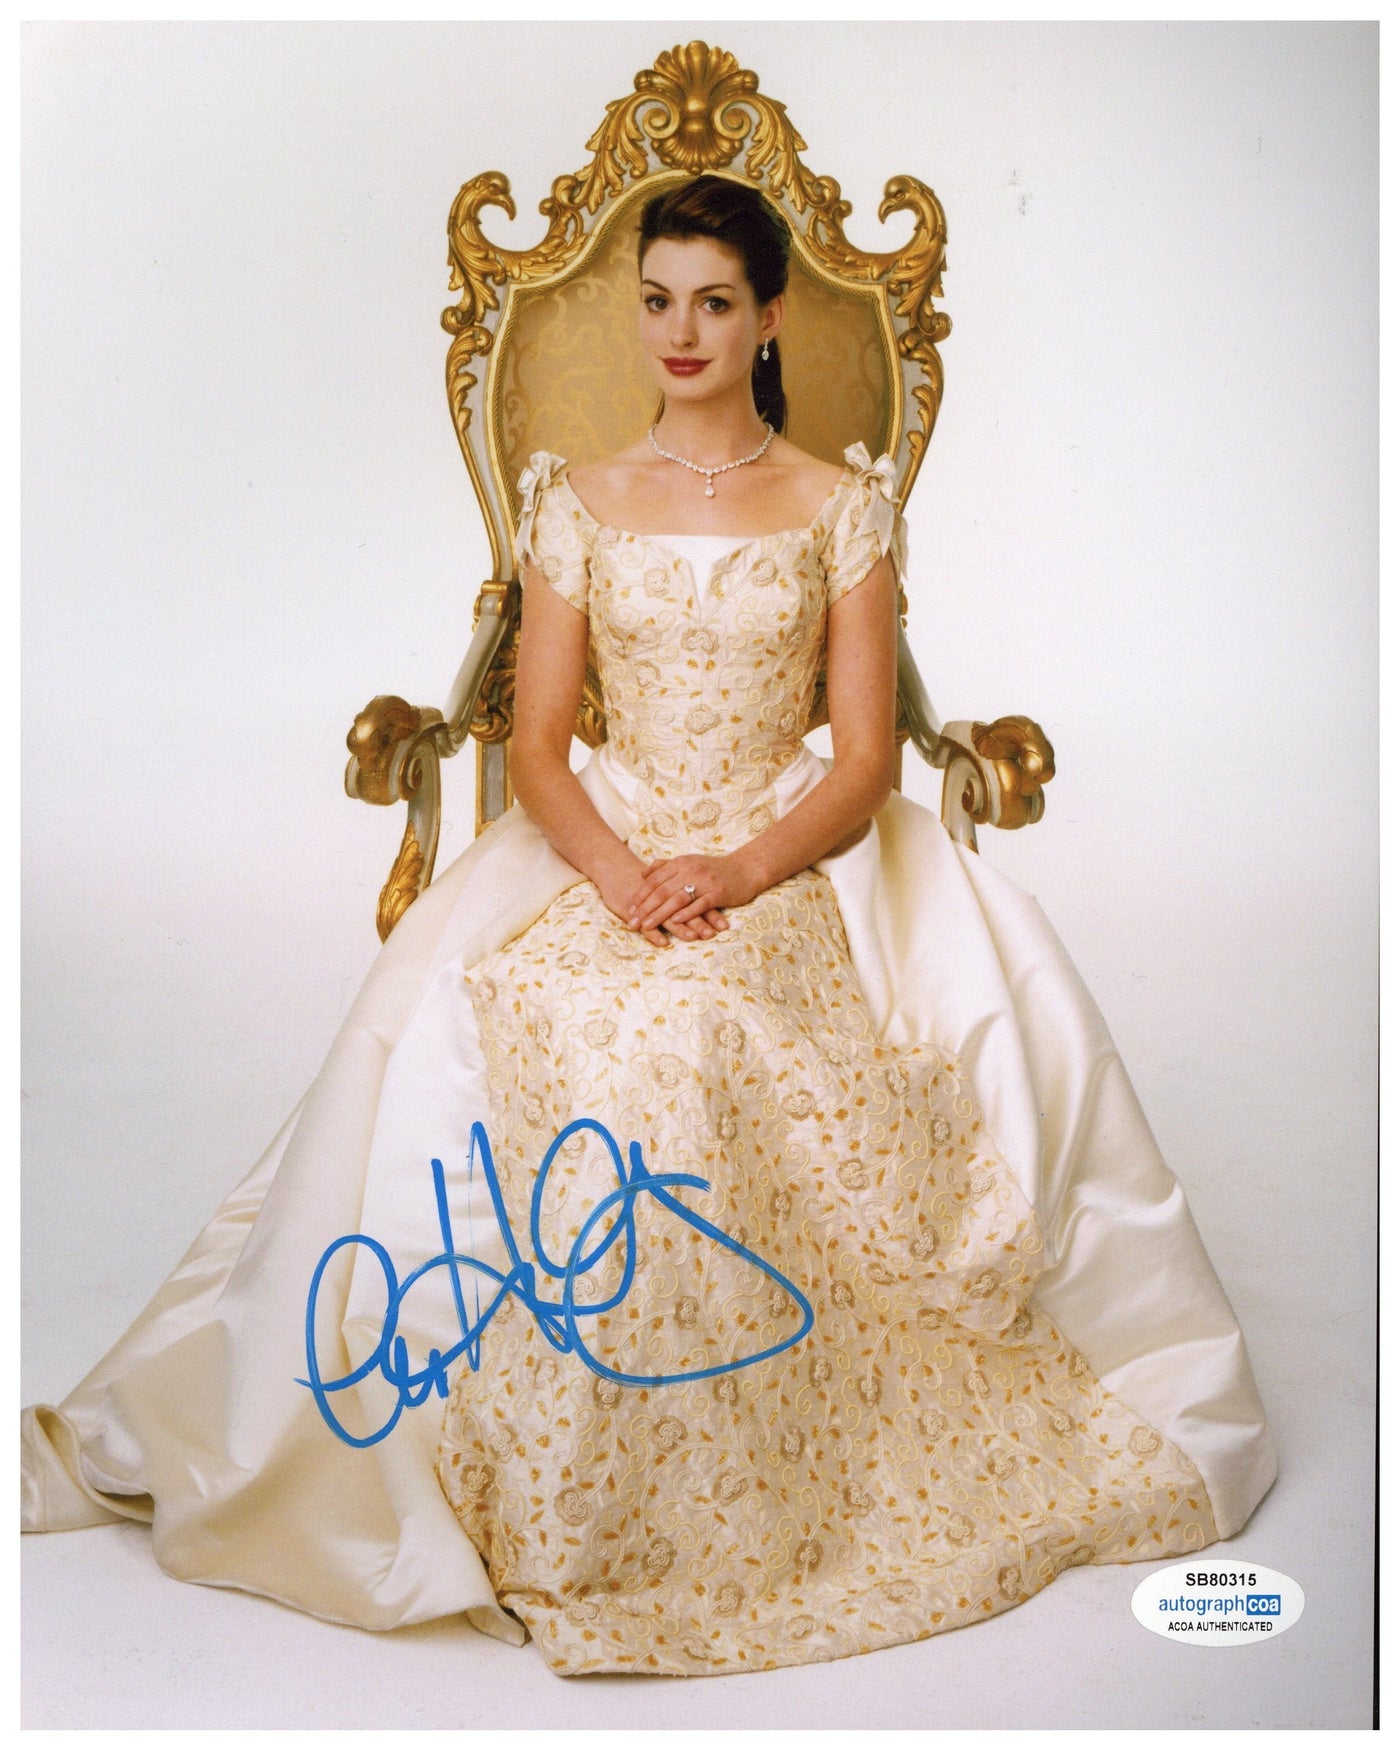 ANNE HATHAWAY SIGNED 8X10 PHOTO THE PRINCESS DIARIES AUTOGRAPHED ACOA 5